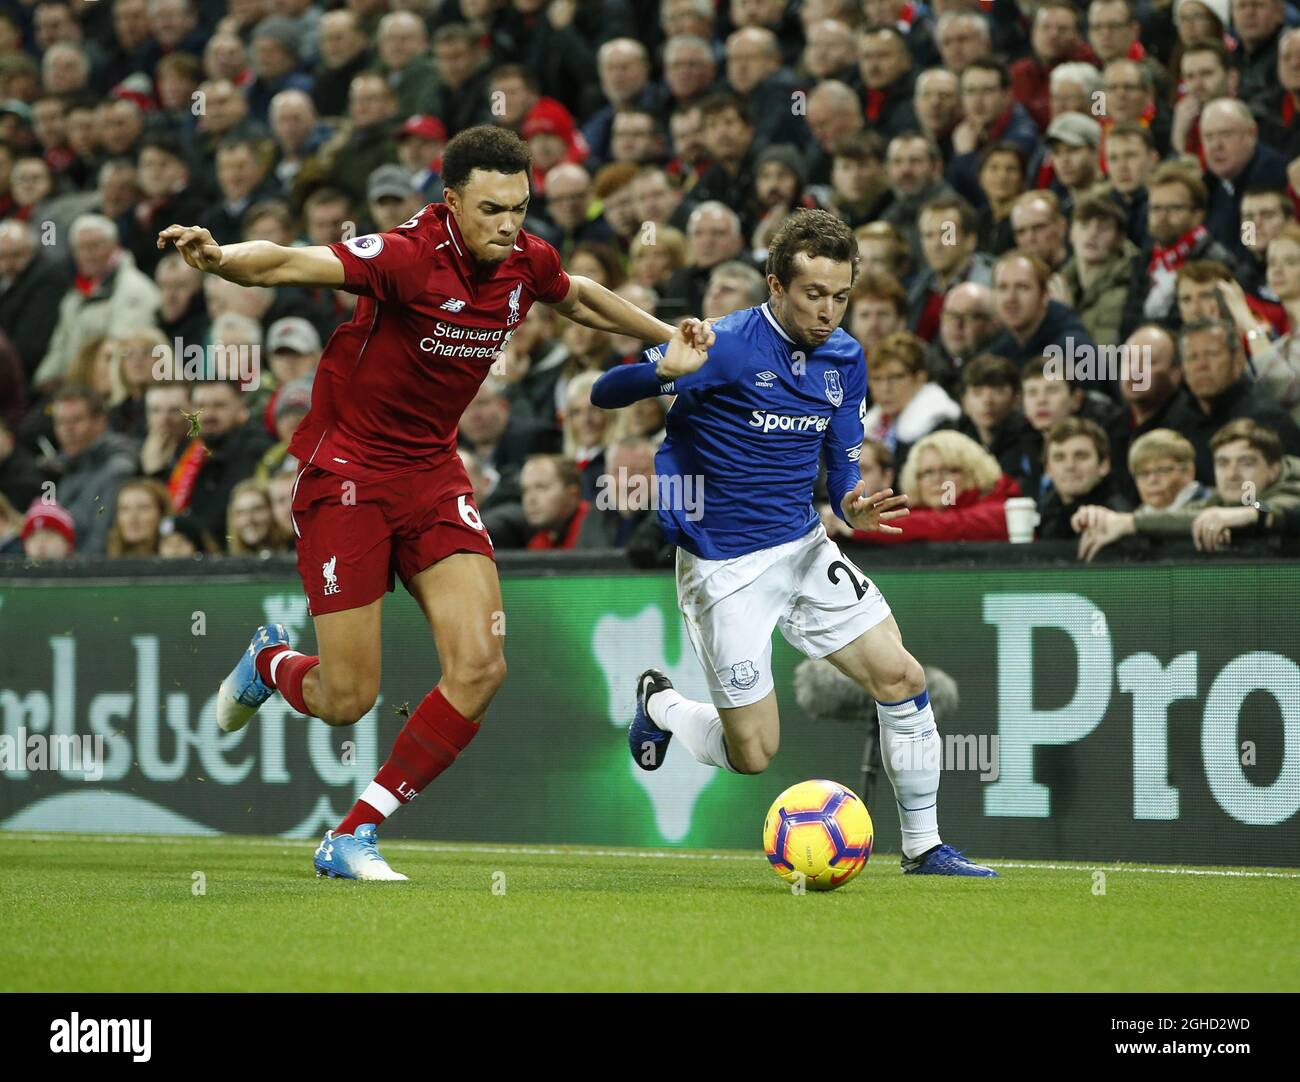 Trent Alexander-Arnold of Liverpool tackles Bernard of Everton during the Premier League match at Anfield Stadium, Liverpool. Picture date 2nd December 2018. Picture credit should read: Andrew Yates/Sportimage via PA Images Stock Photo